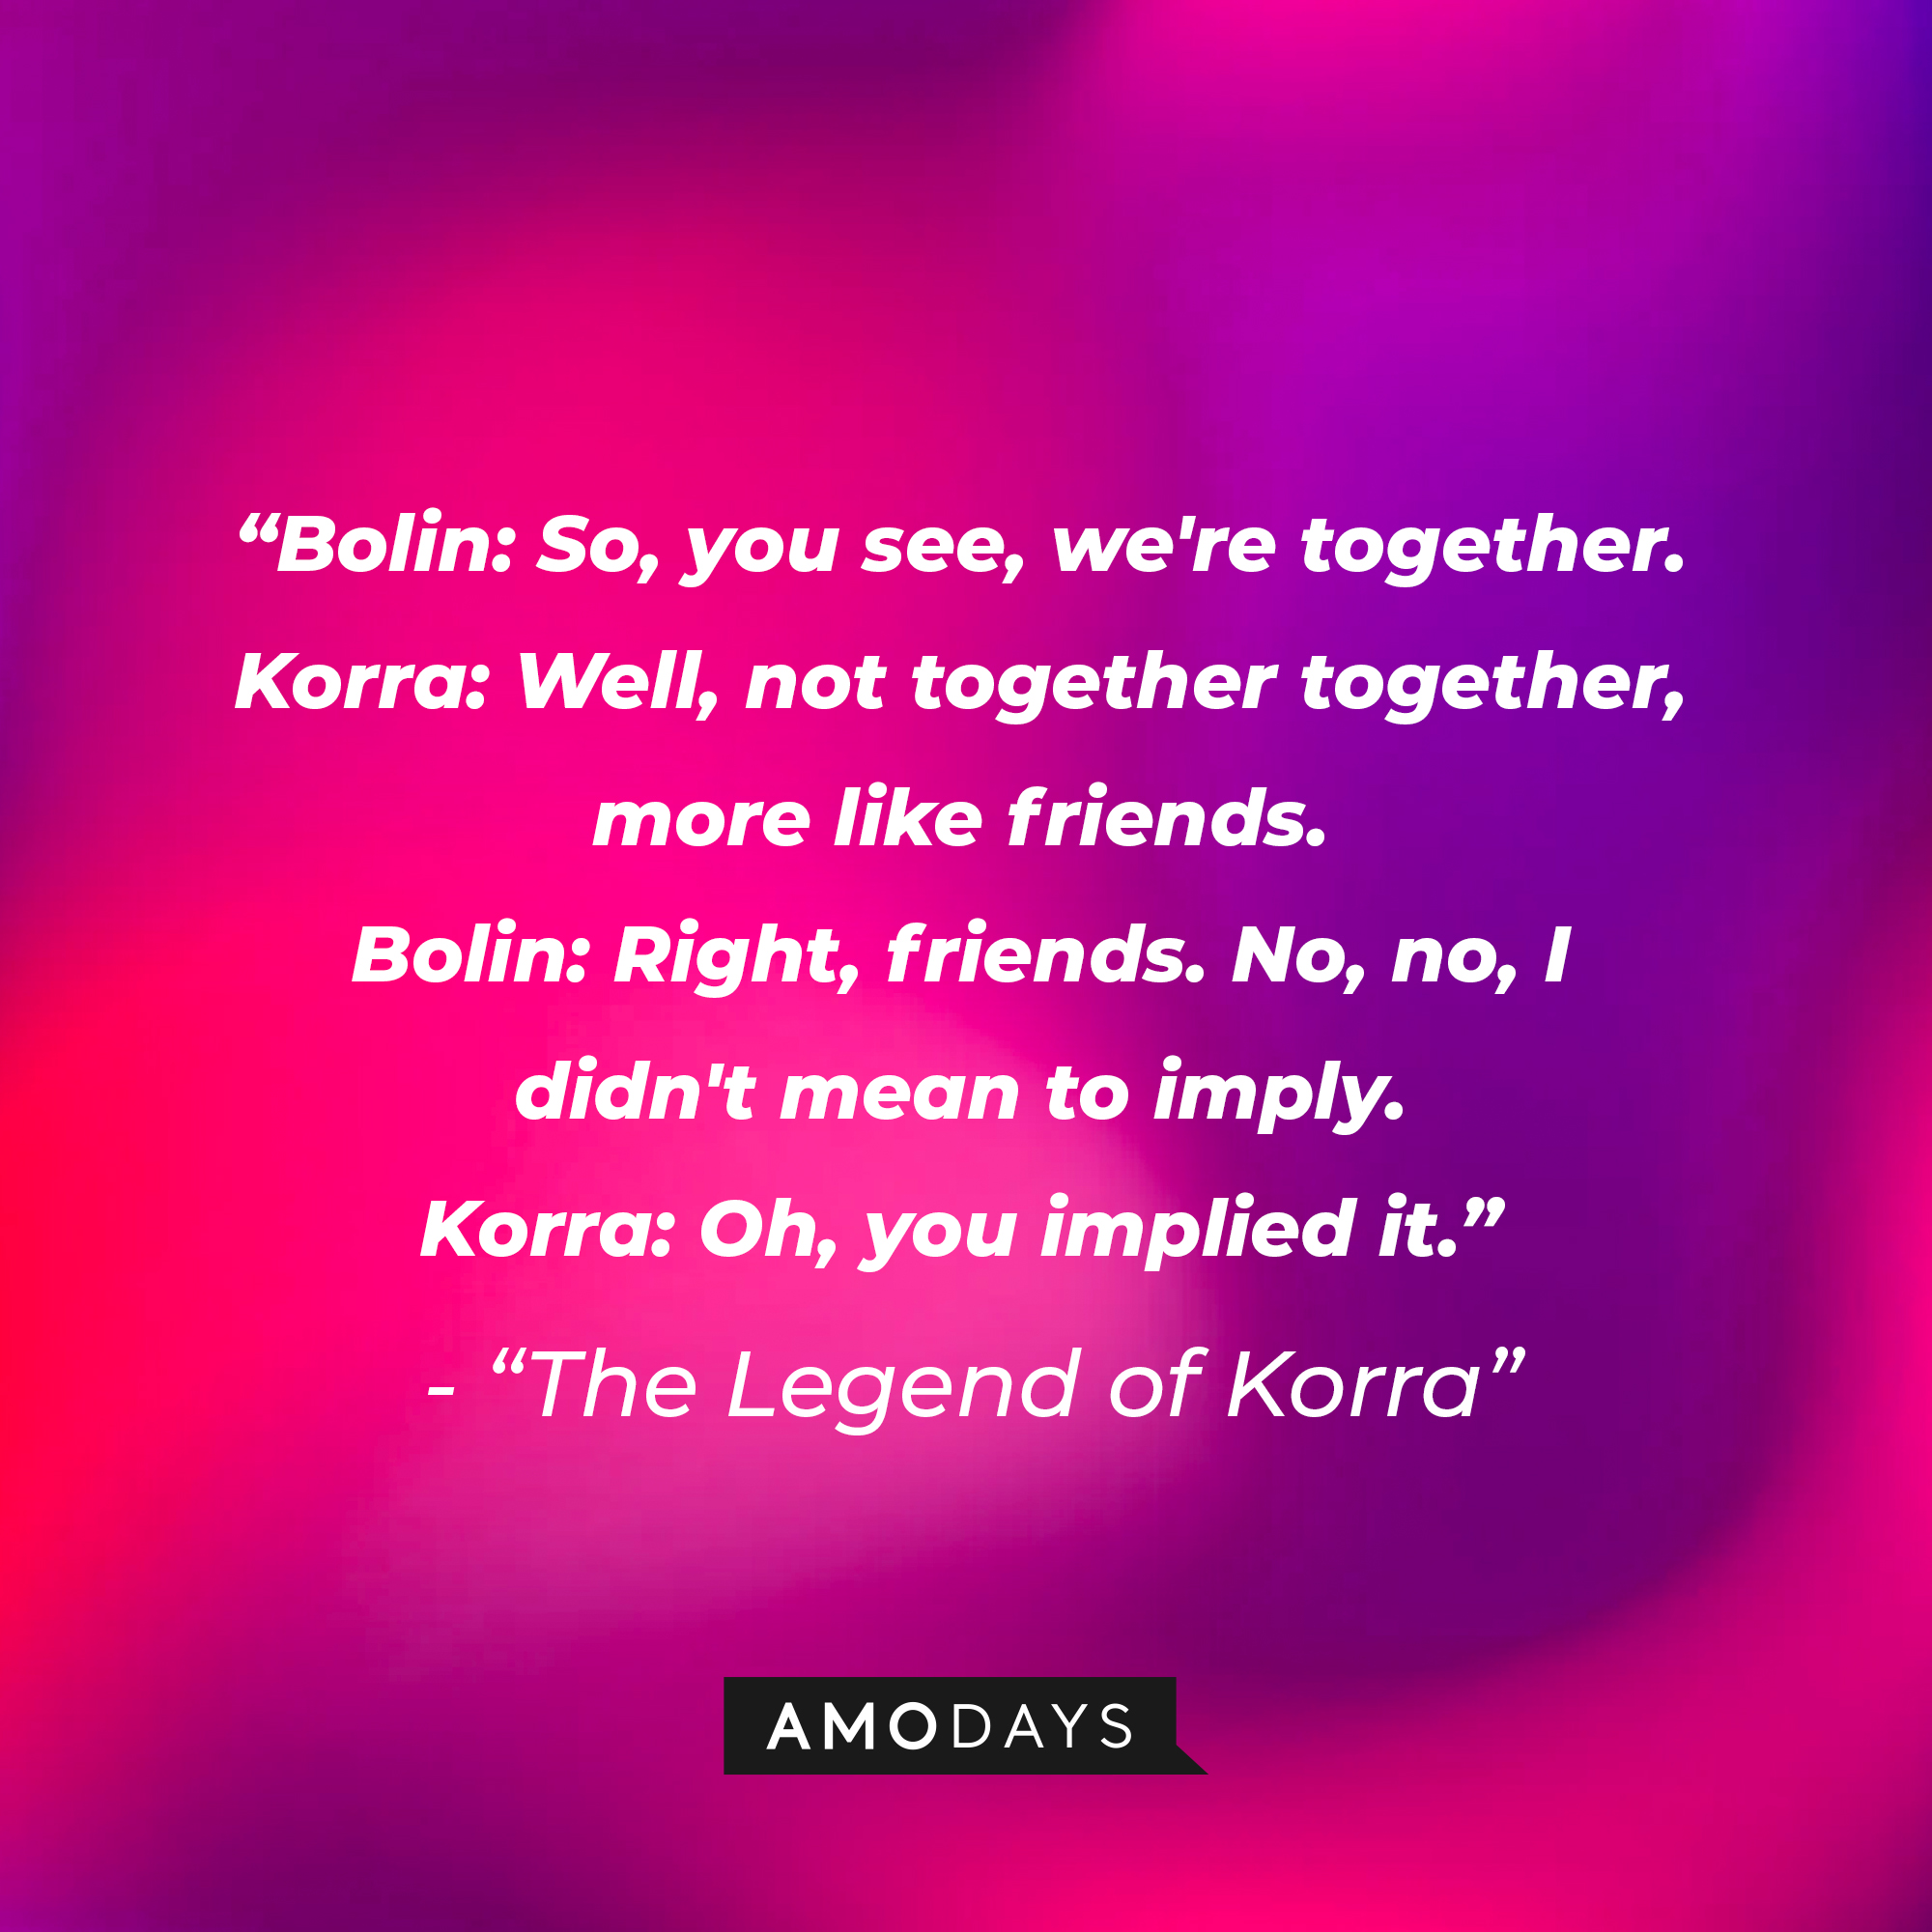 Korra and Bolin’s quote in “Avatar: The Legend of Korra:” "Bolin: So, you see, we're together. ; Korra: Well, not together together, more like friends. ‘ Bolin: Right, friends. No, no, I didn't mean to imply. ‘ Korra: Oh, you implied it." | Source: Amodays